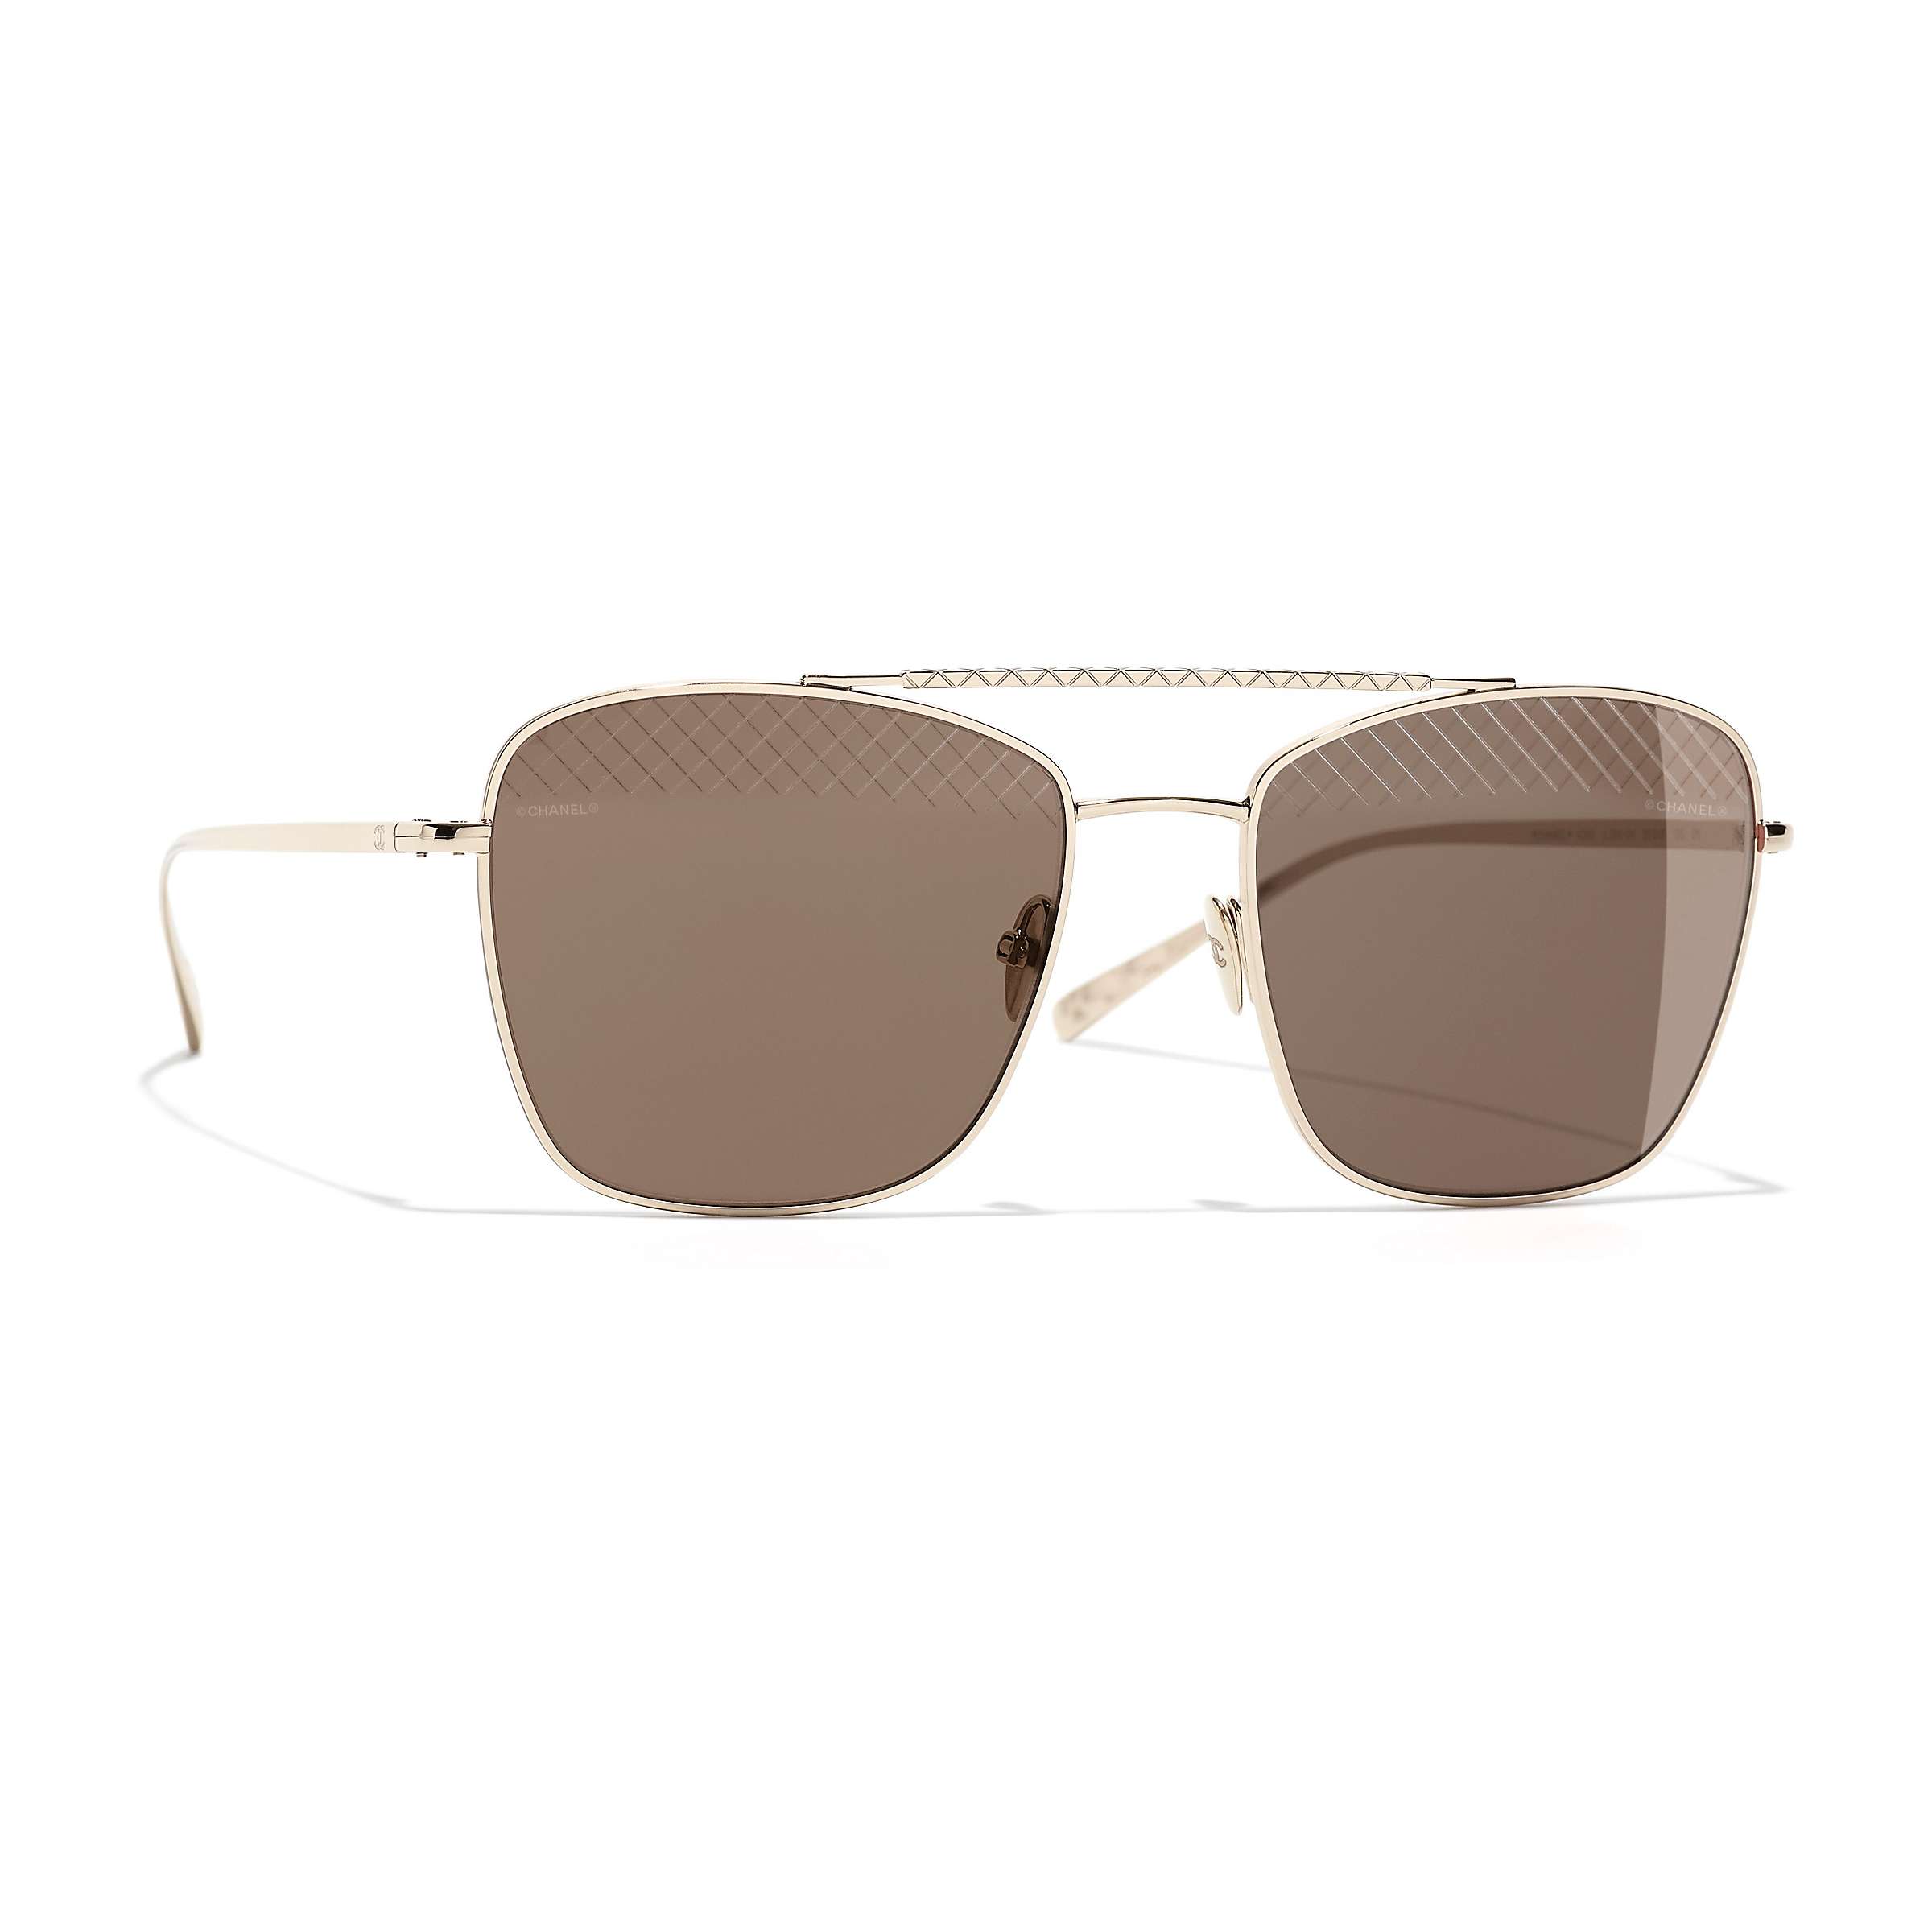 Buy CHANEL Pilot Sunglasses CH4256 Gold/Brown Online at johnlewis.com